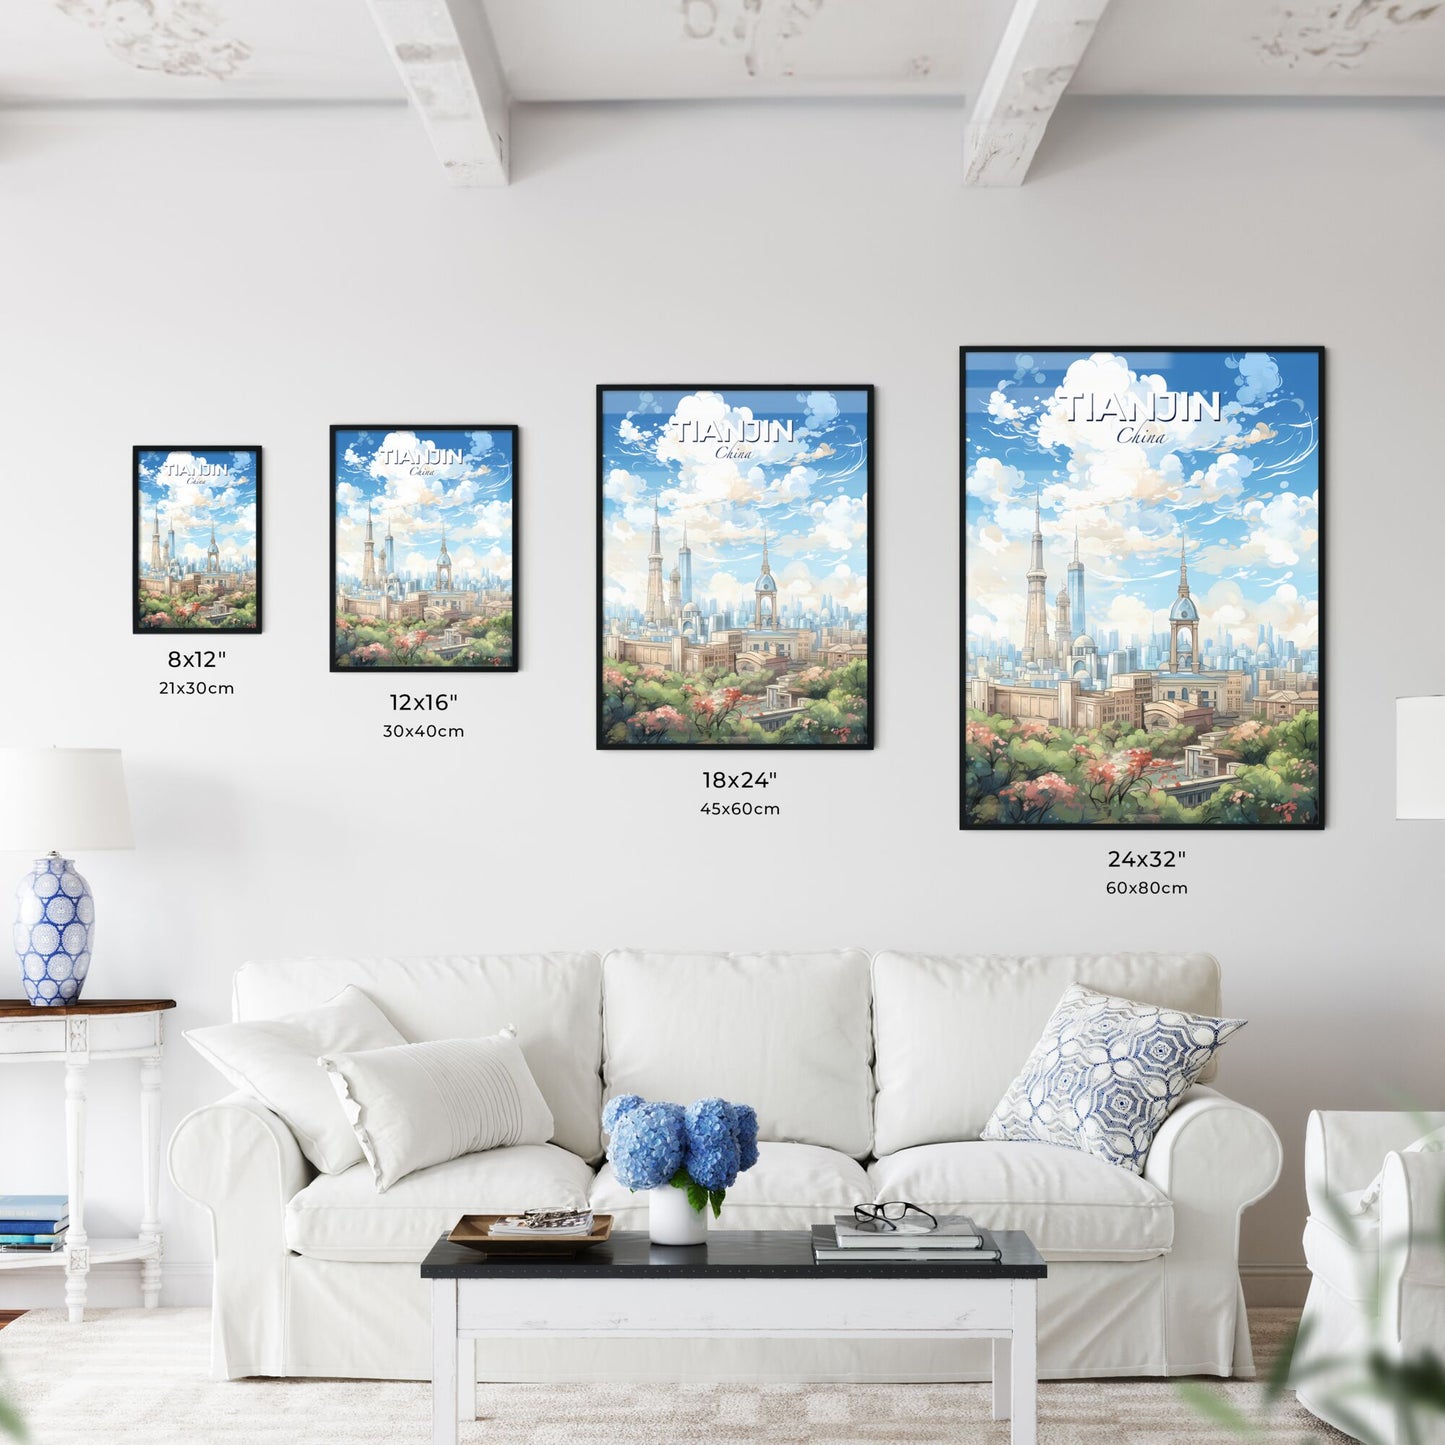 Tianjin China Skyline - A City With Towers And Trees - Customizable Travel Gift Default Title